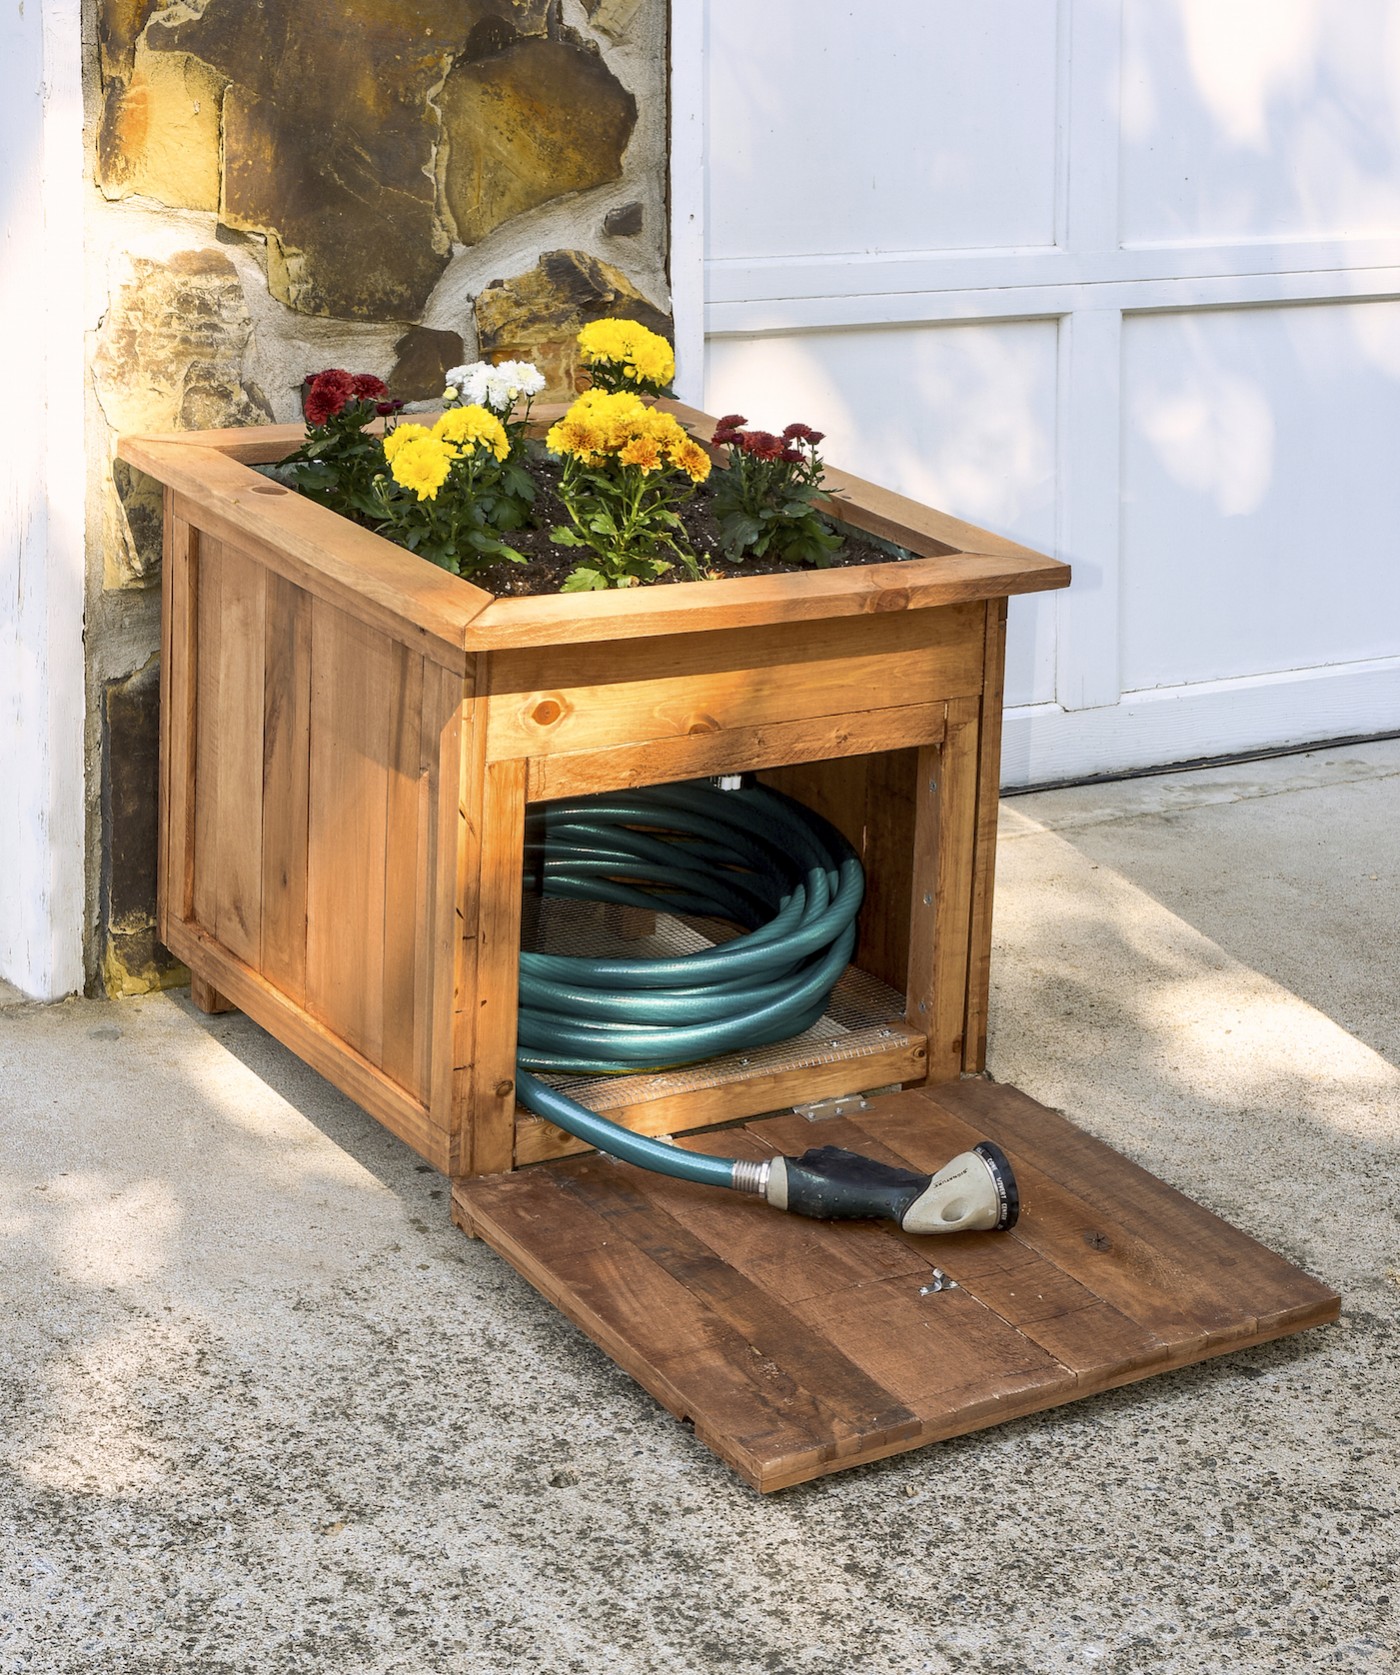 Hose Holder with Build-In Planter